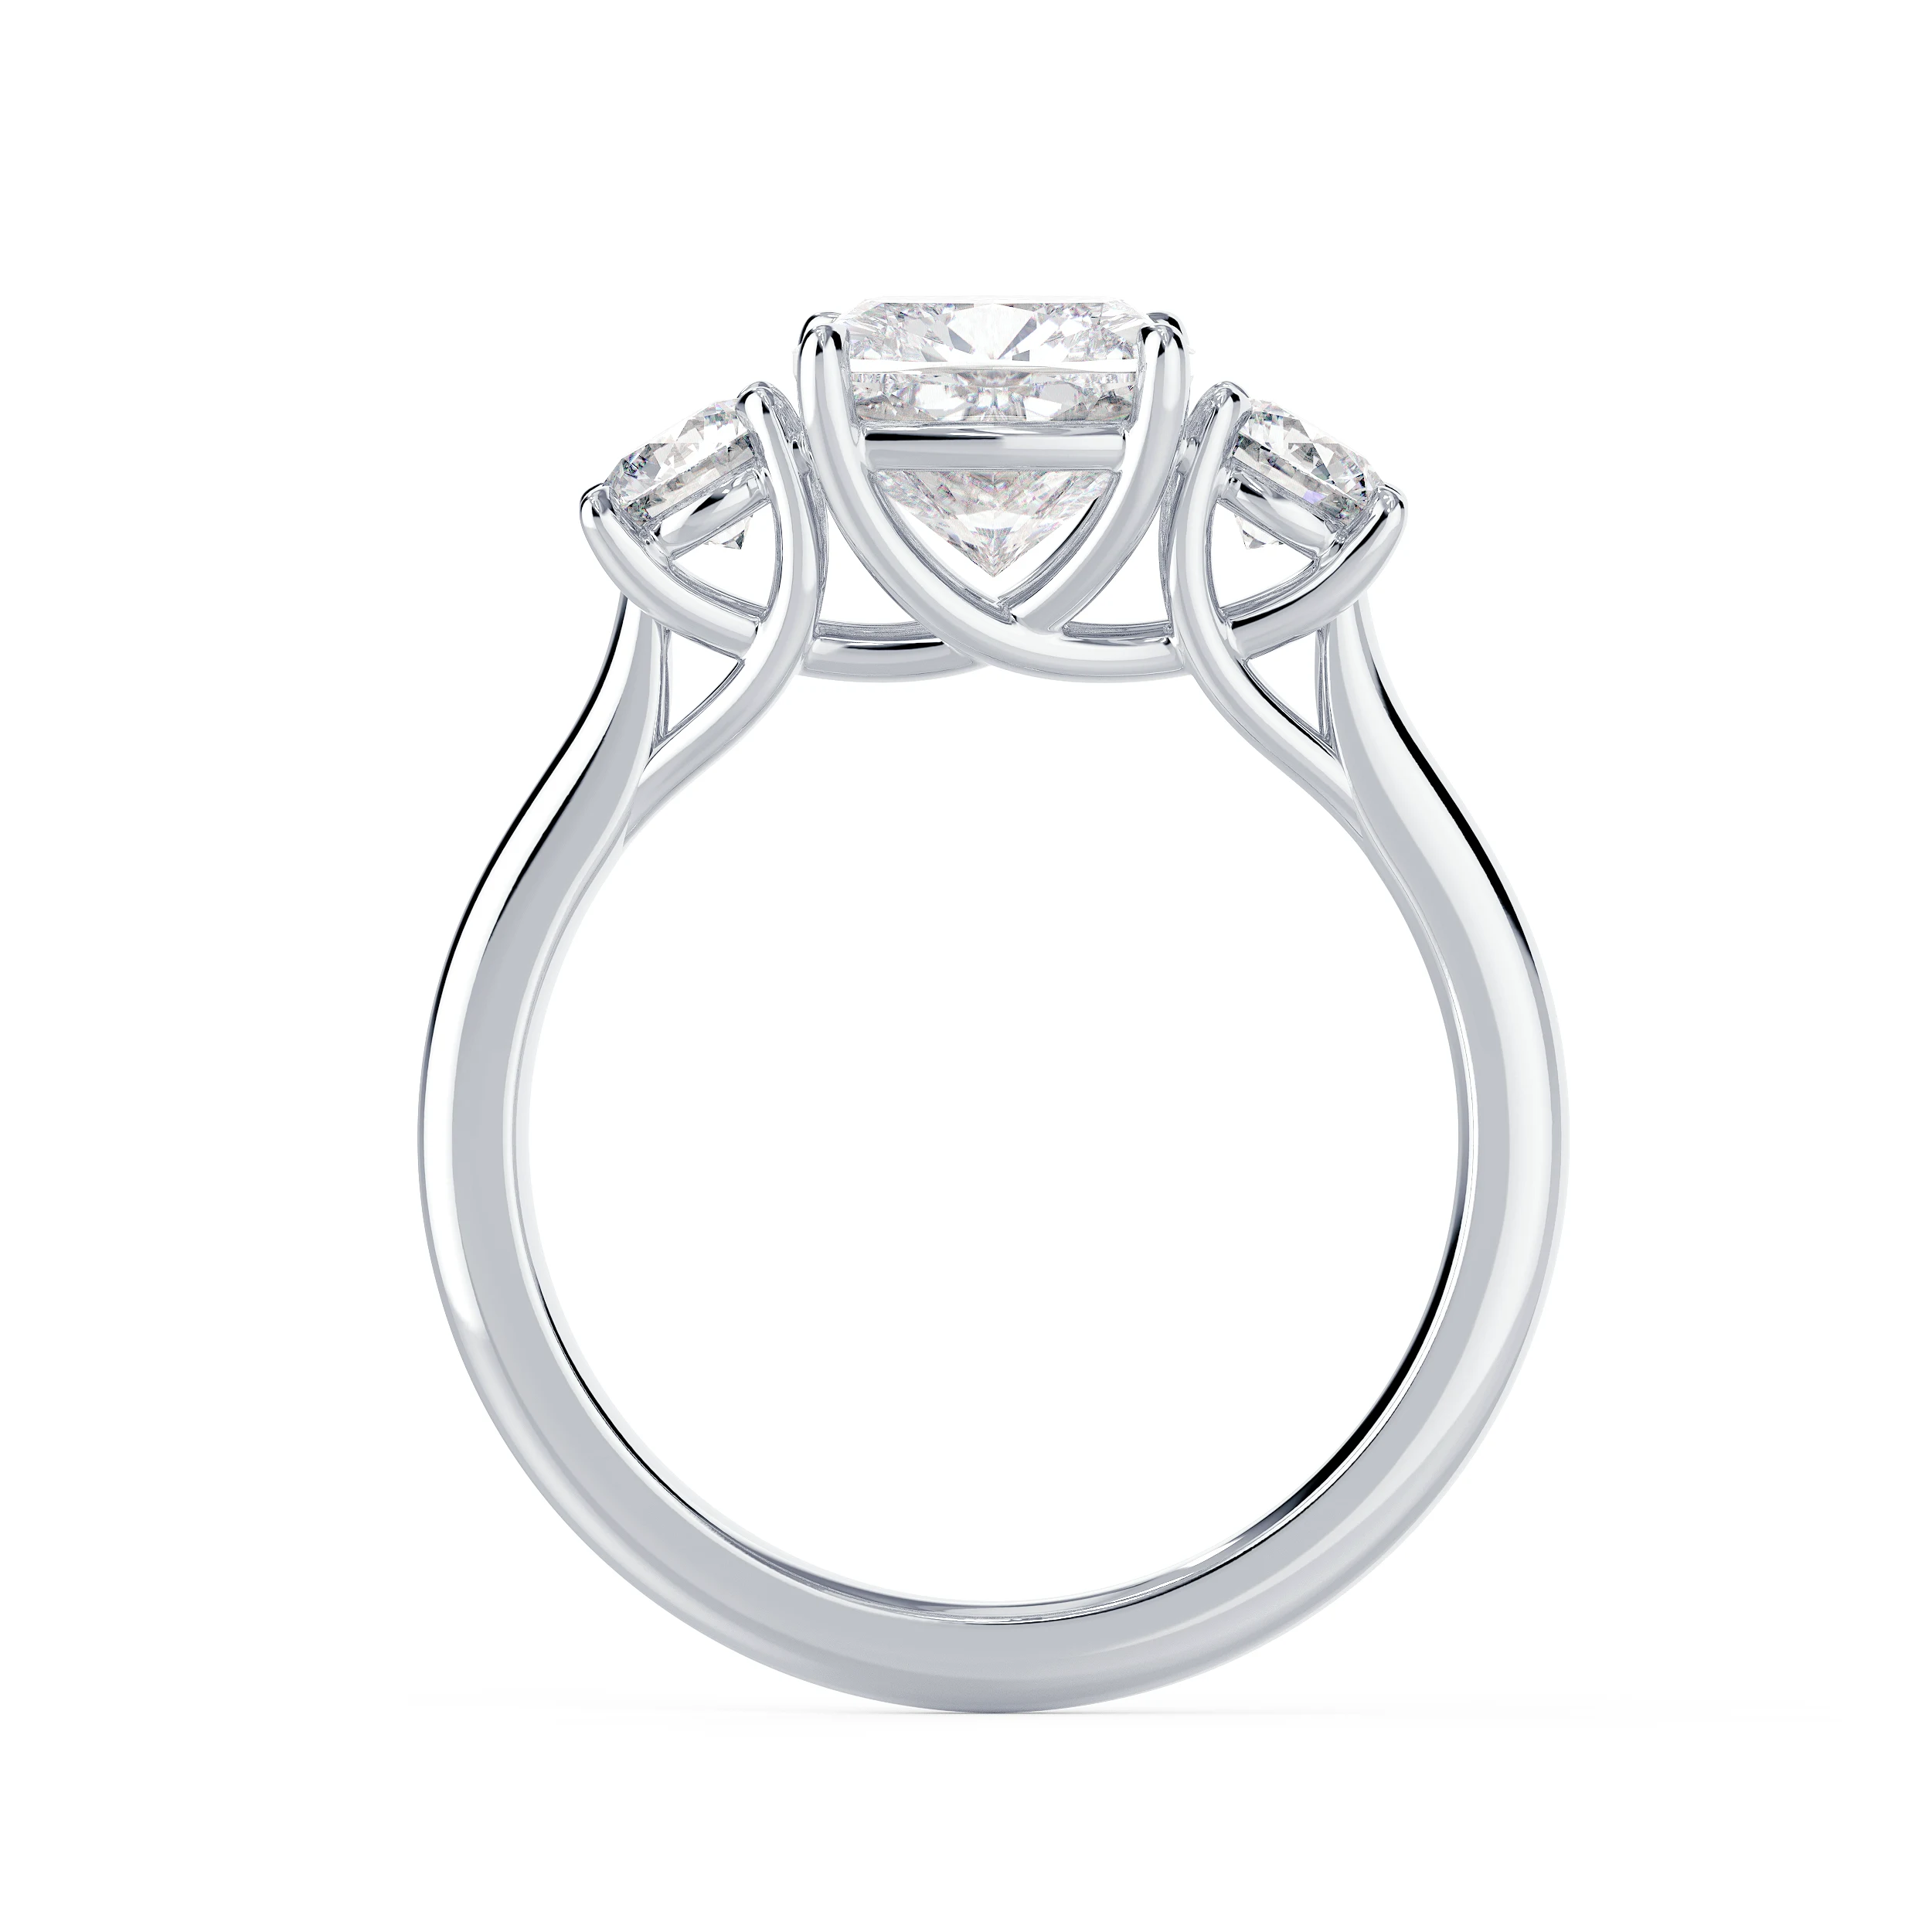 White Gold Cushion and Round Diamond Engagement Ring featuring High Quality Man Made Diamonds (Profile View)